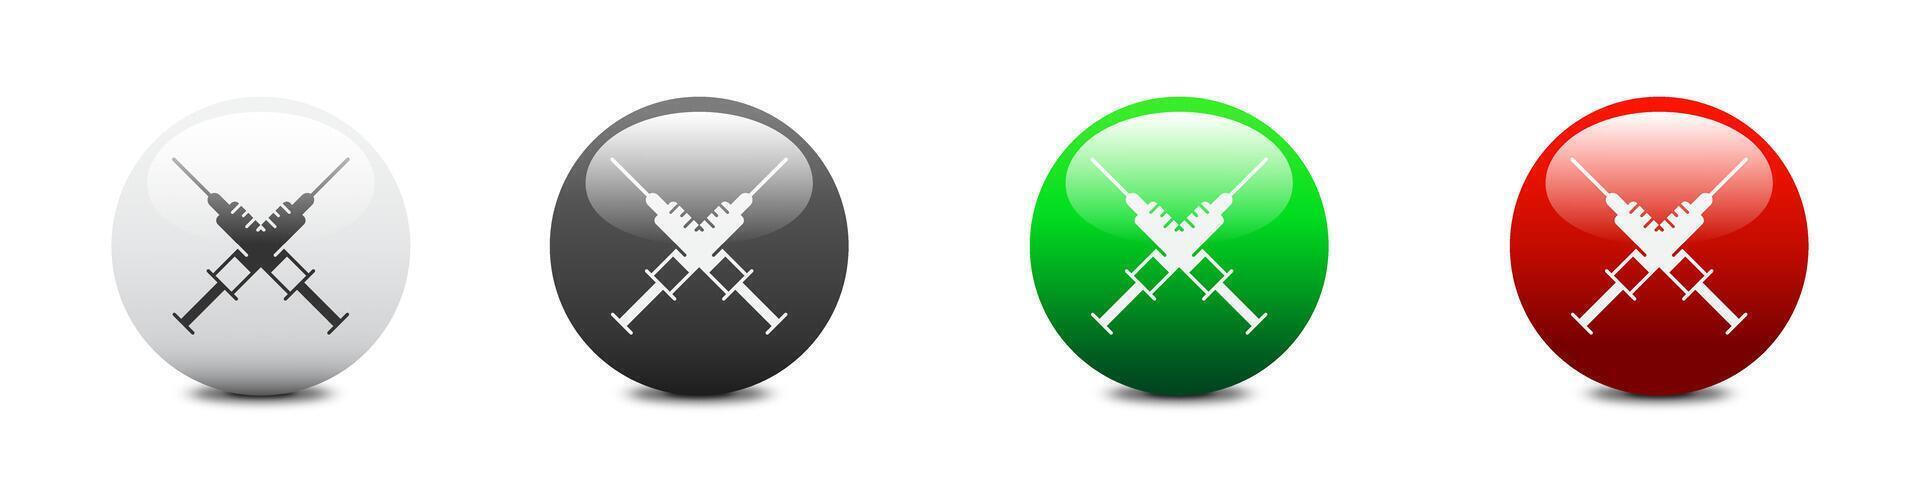 Crossed syringe icon on a round glossy button. Crossed Injections icon. Syringe for vaccine. Flat vector illustration.